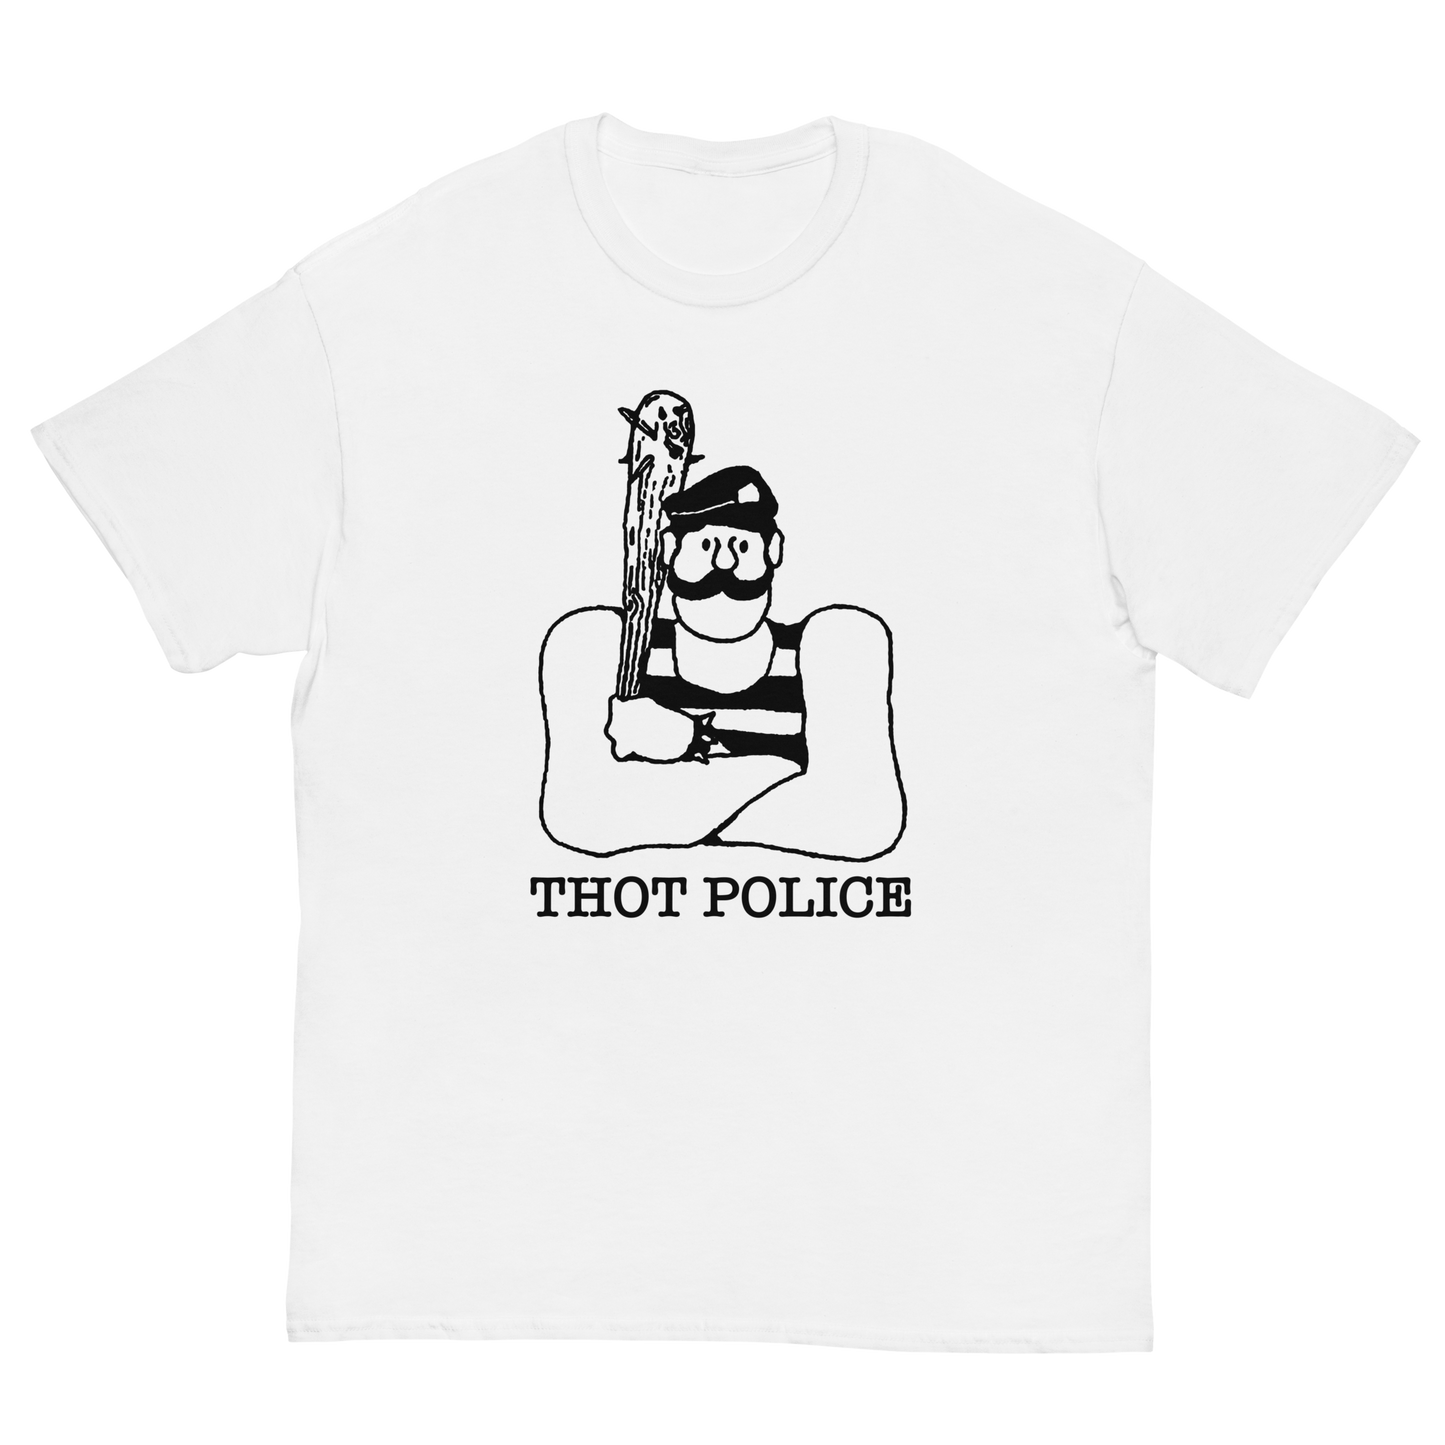 THOT POLICE T-SHIRT